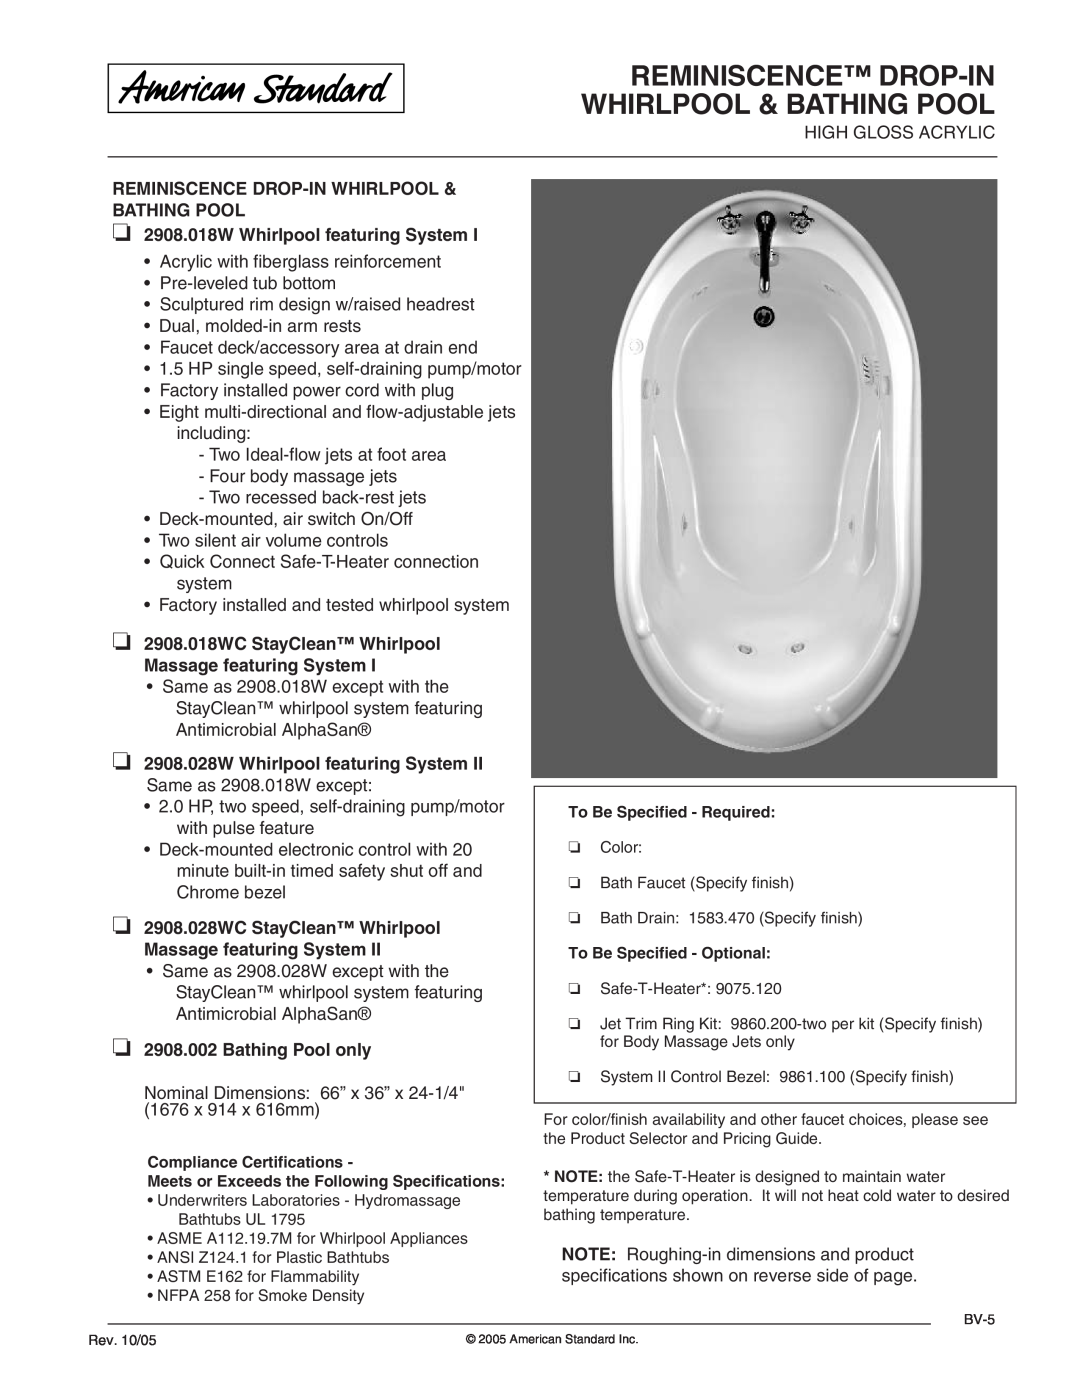 American Standard 2908.018WC dimensions Reminiscence Drop-Inwhirlpool & Bathing Pool, 2908.018W Whirlpool featuring System 